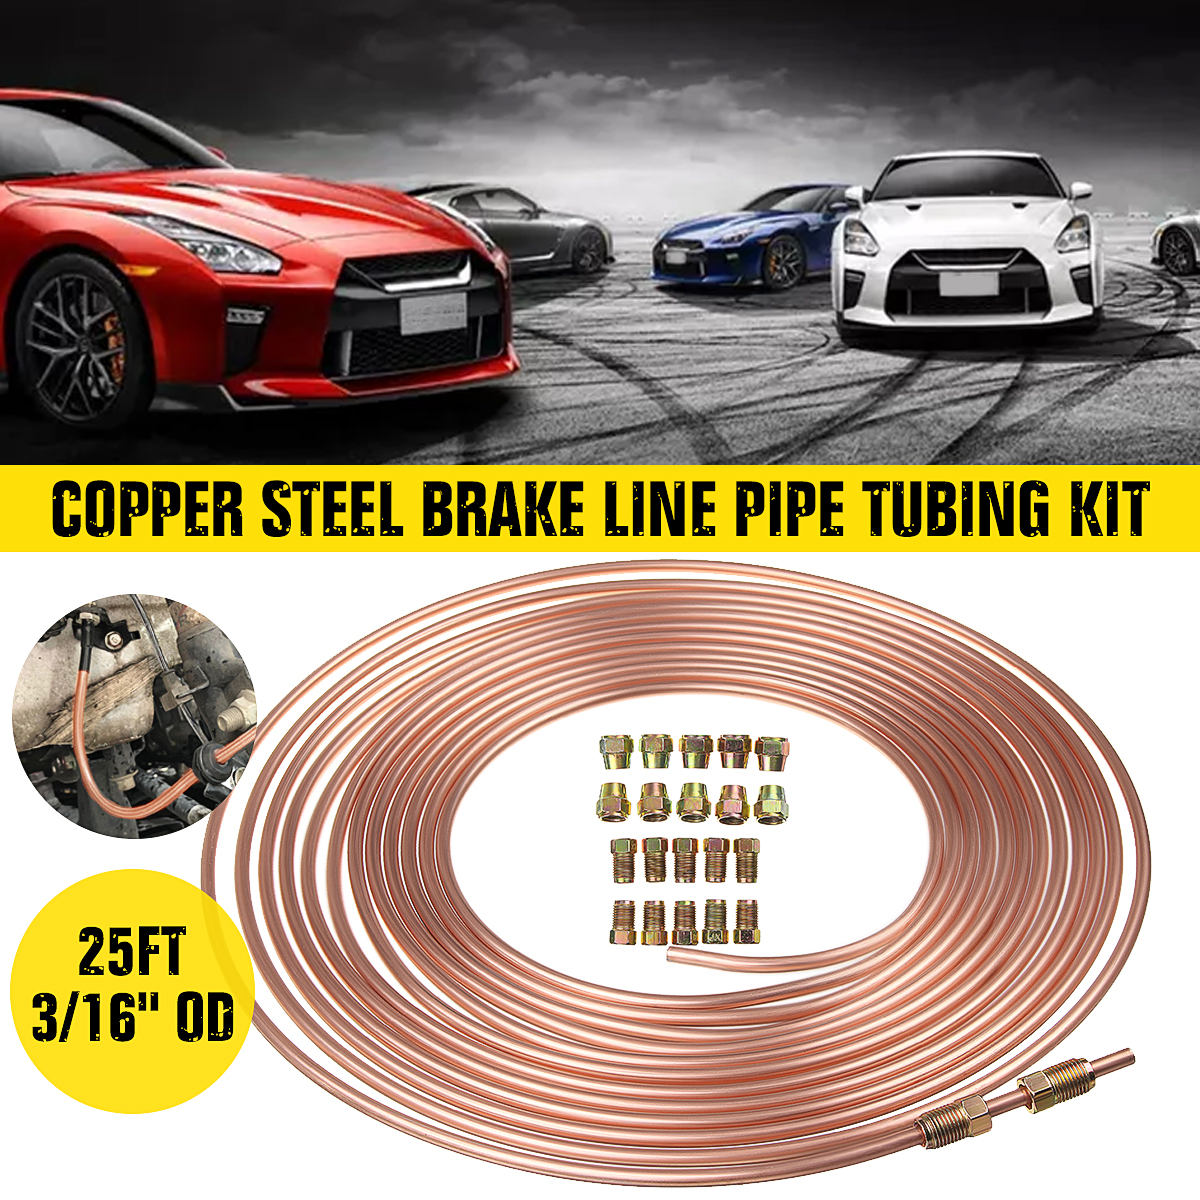 Roll-Copper-Steel-25-ft-316quot-Brake-Line-Pipe-Tubing-with-20-Pcs-Kit-Fittings-Brake-Female-Male-Nu-1543212-10